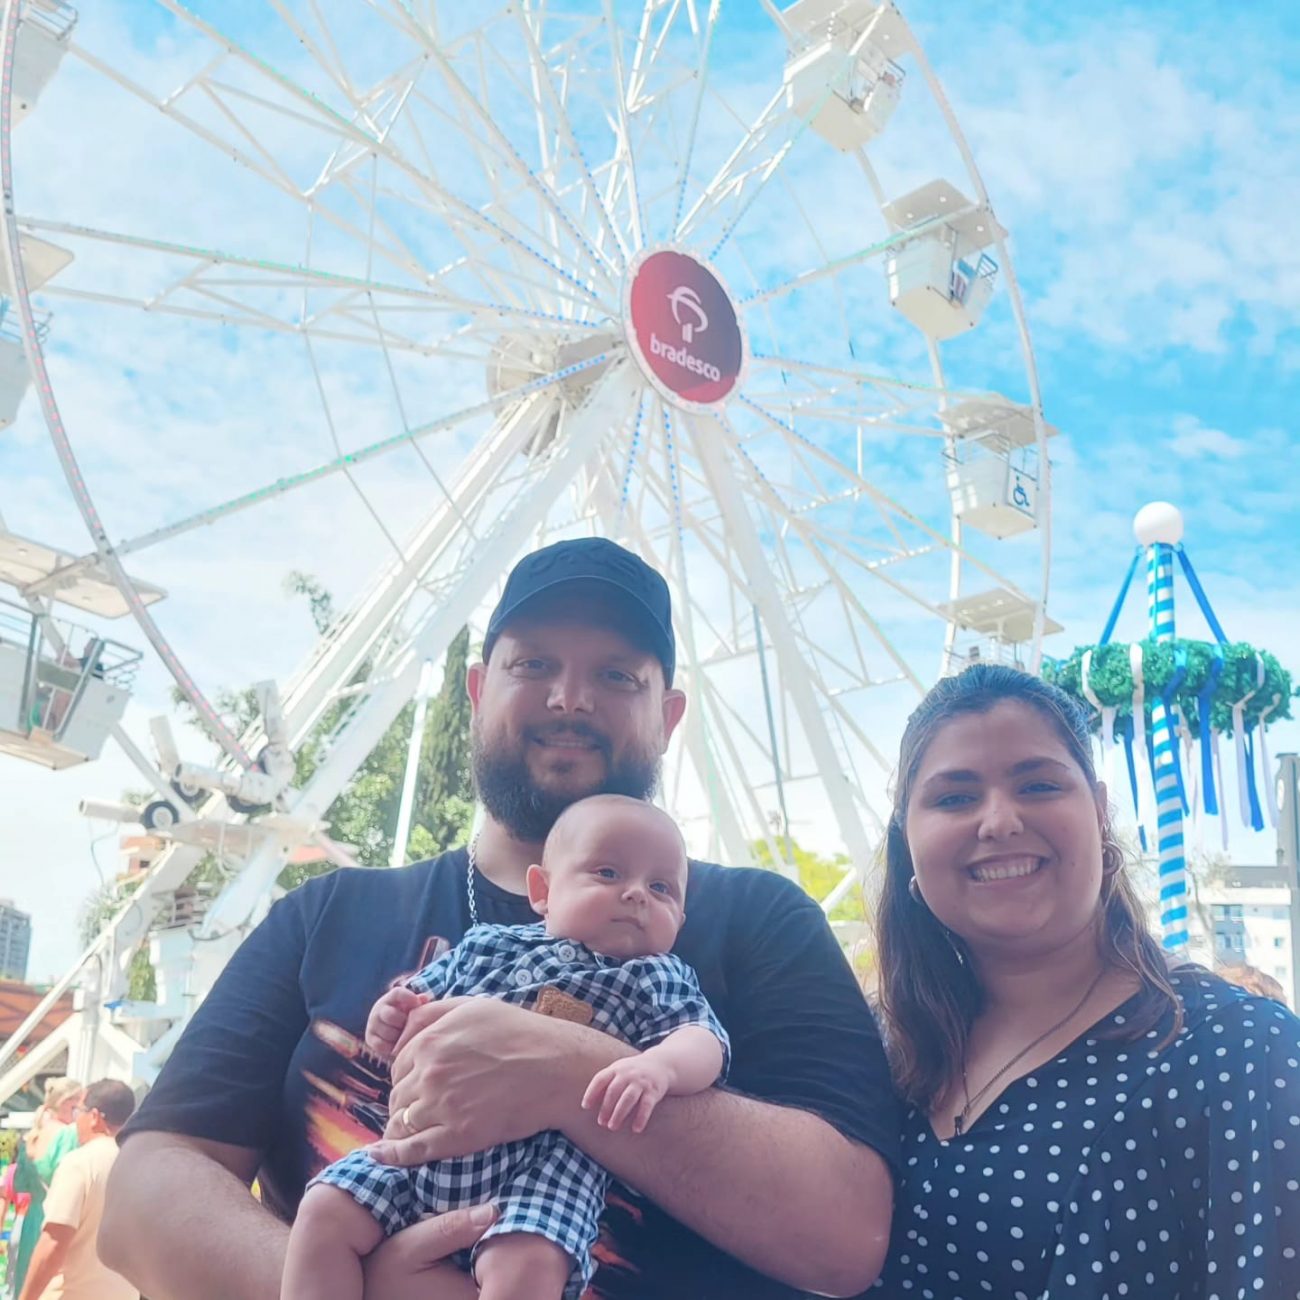 Family Fun at an Amusement Park with Baby Miguel - Personal Collection/Disclosure